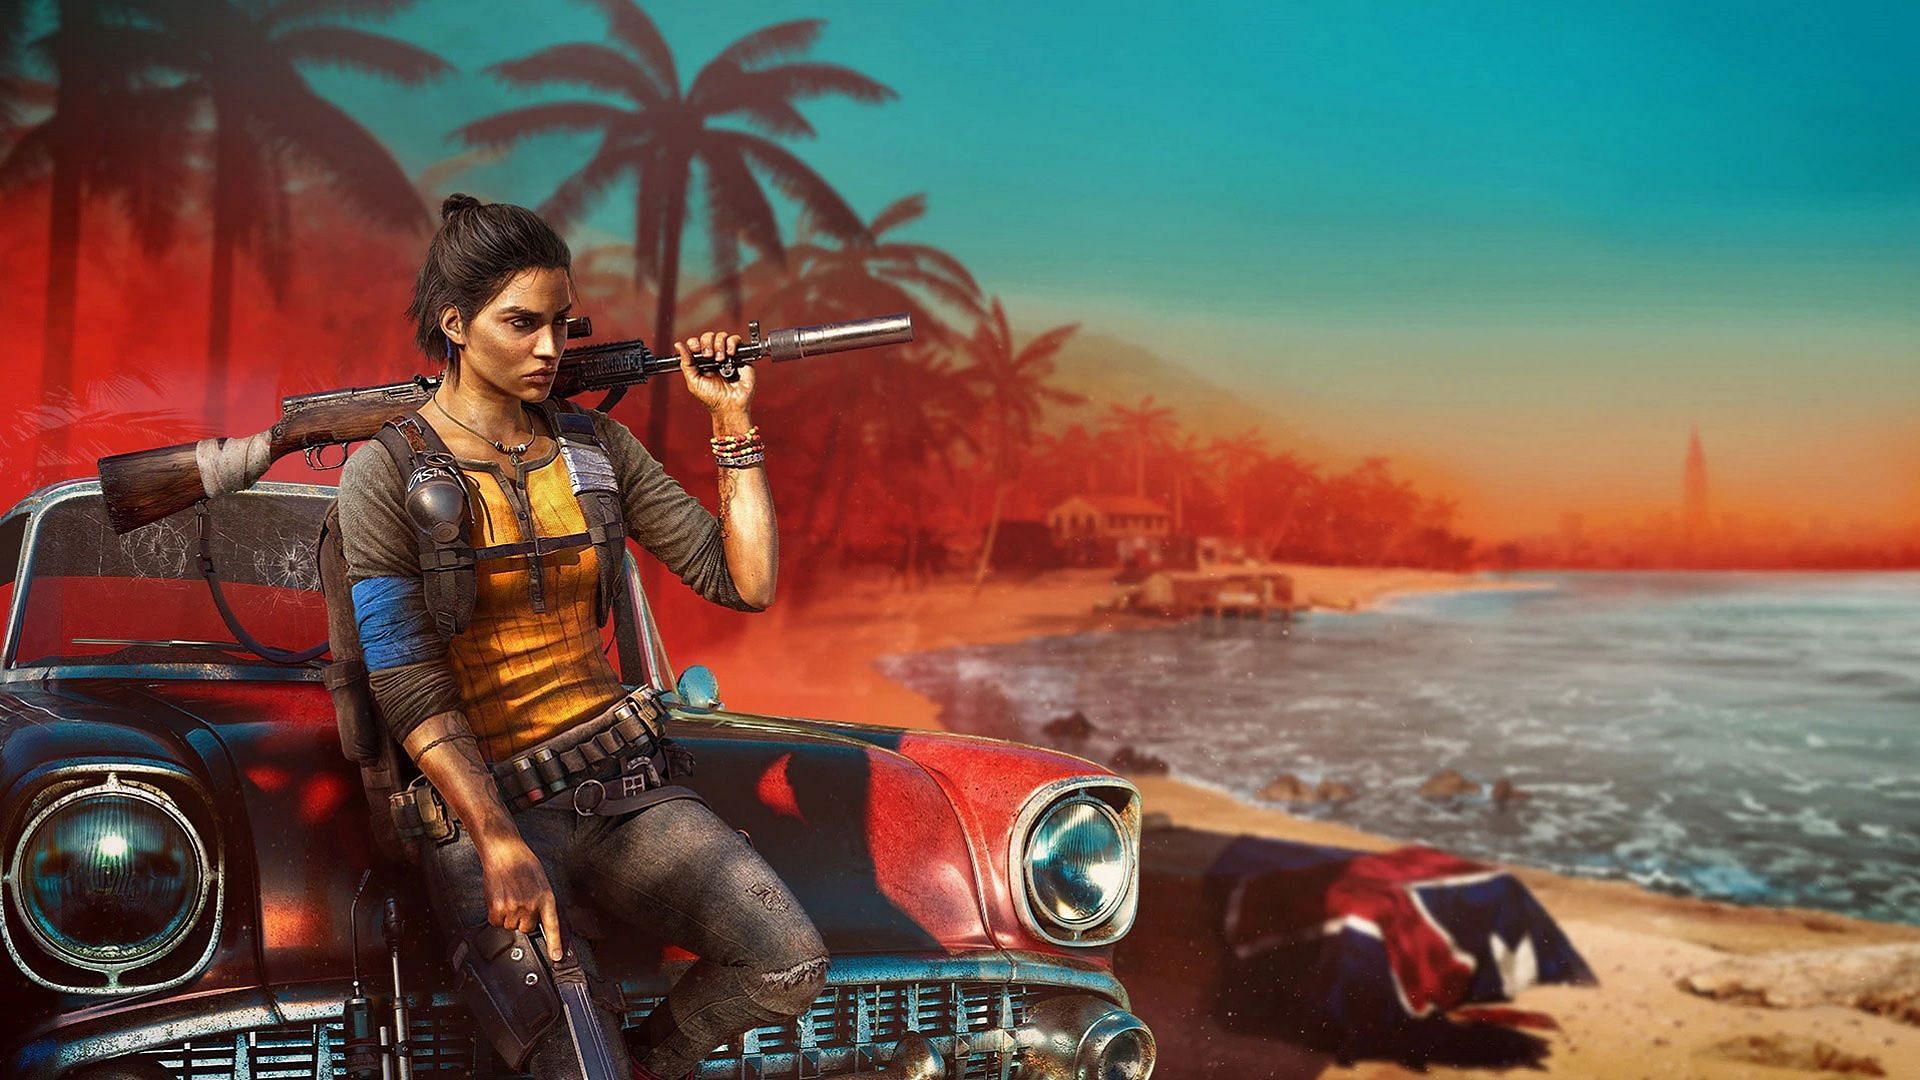 The new Far Cry title is yet to be announced officially (Image via Ubisoft)